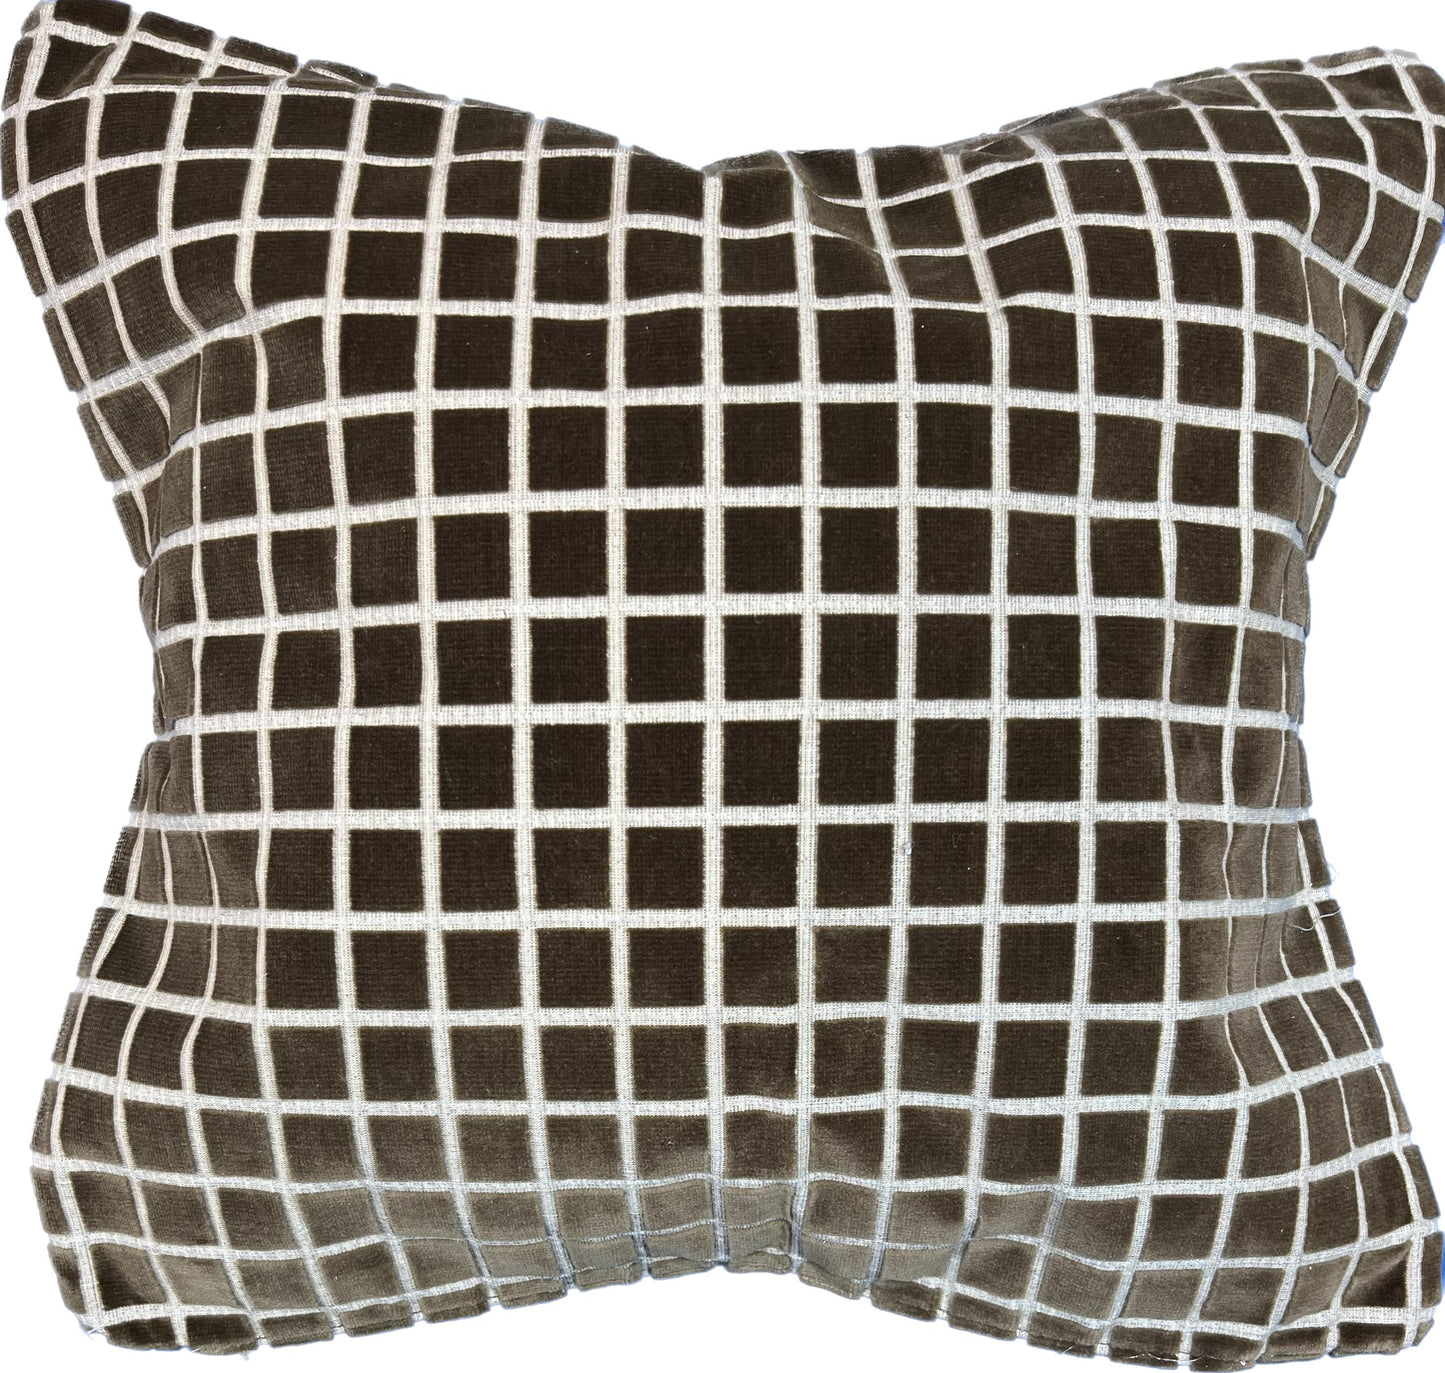 20"x20" Squares Pillow Cover